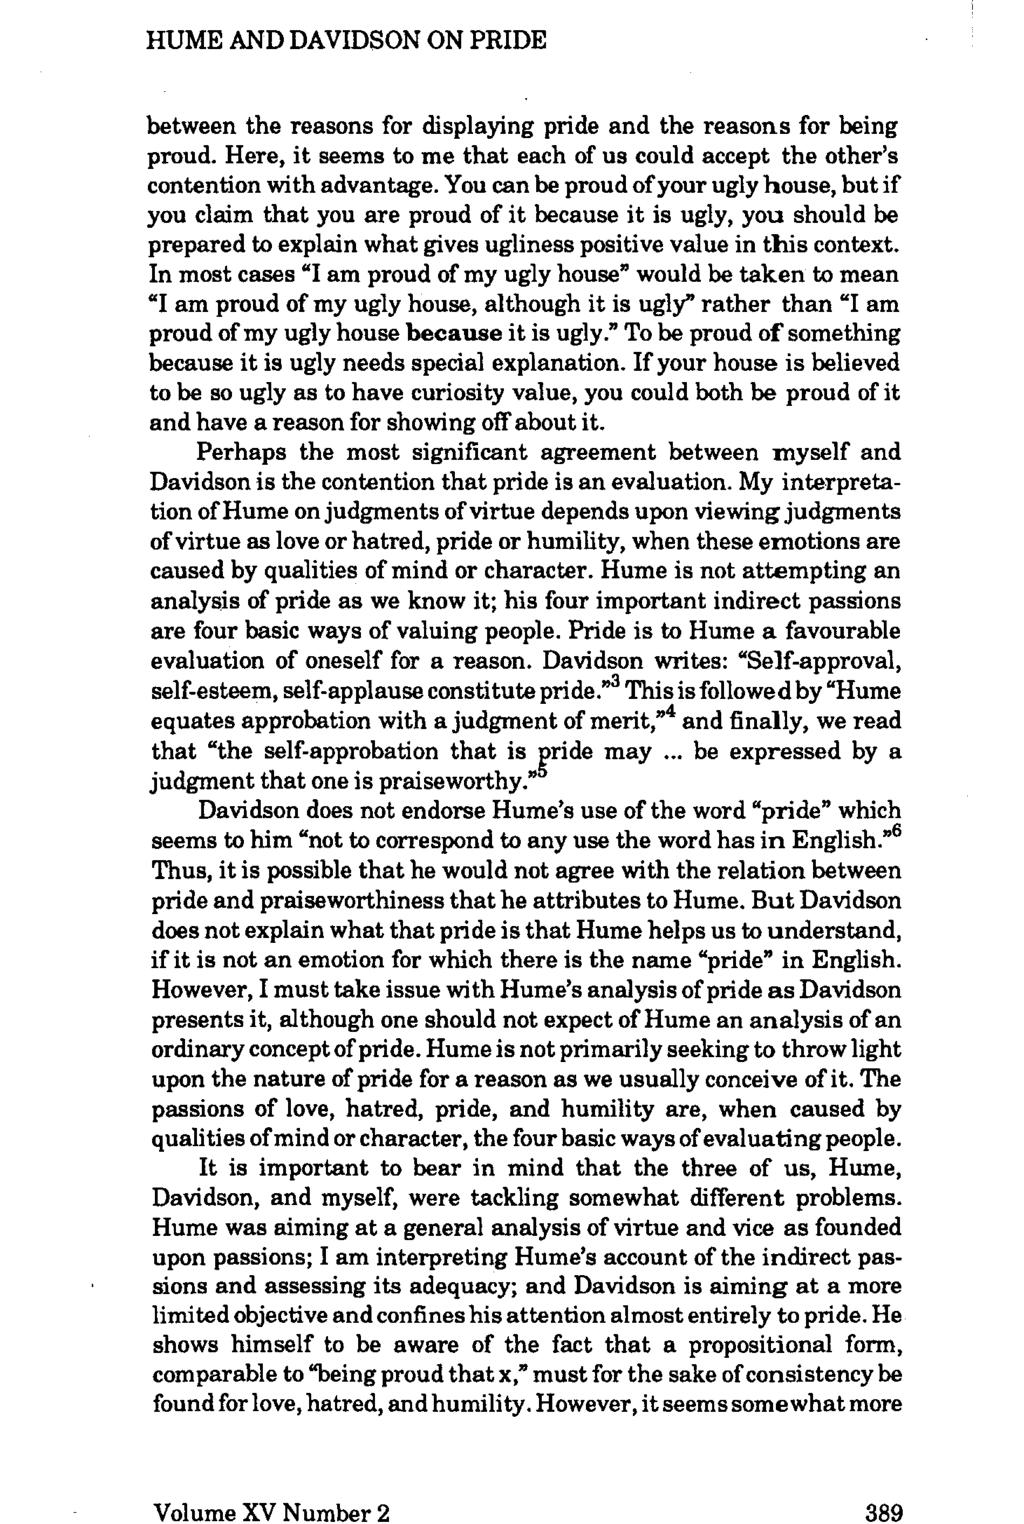 Volume XV Numher 2 HUME AND DAVIDSON ON PRIDE ' between the reasons for displaying pride and the reasons for being proud.